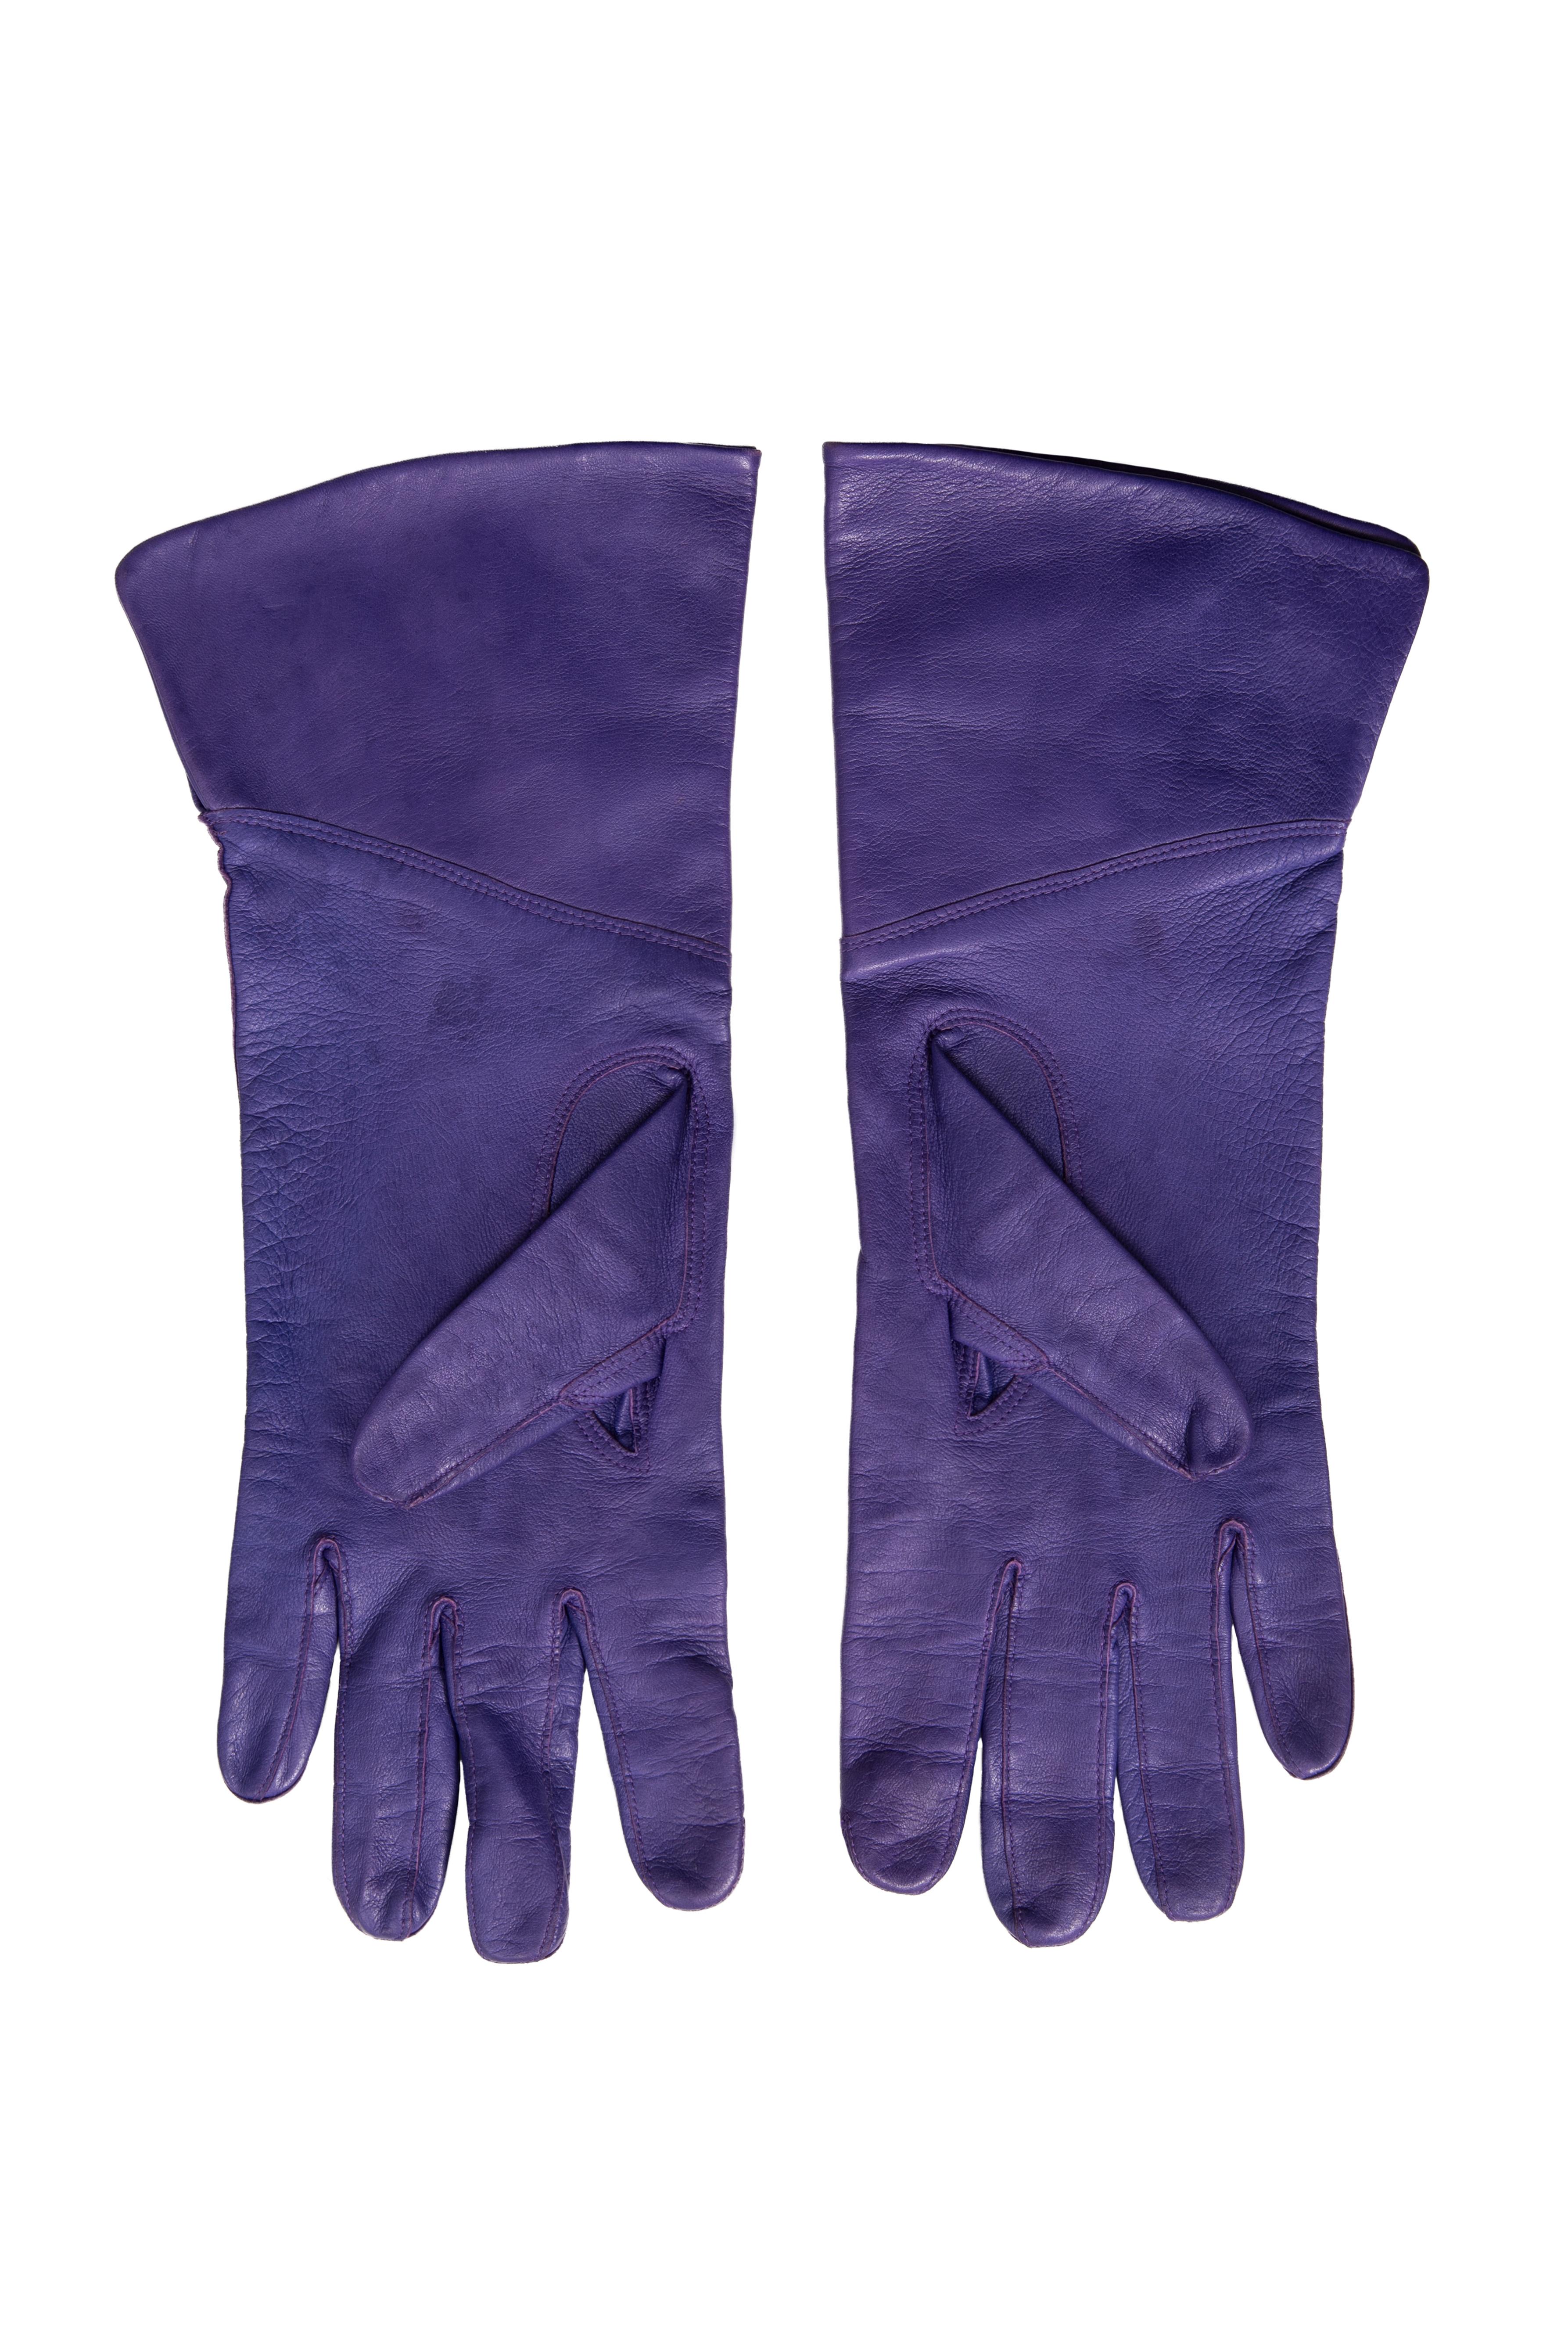 Women's Roeckl Munich Purple Nappa Leather Gauntlet-Style Gloves with Flared Cuffs For Sale